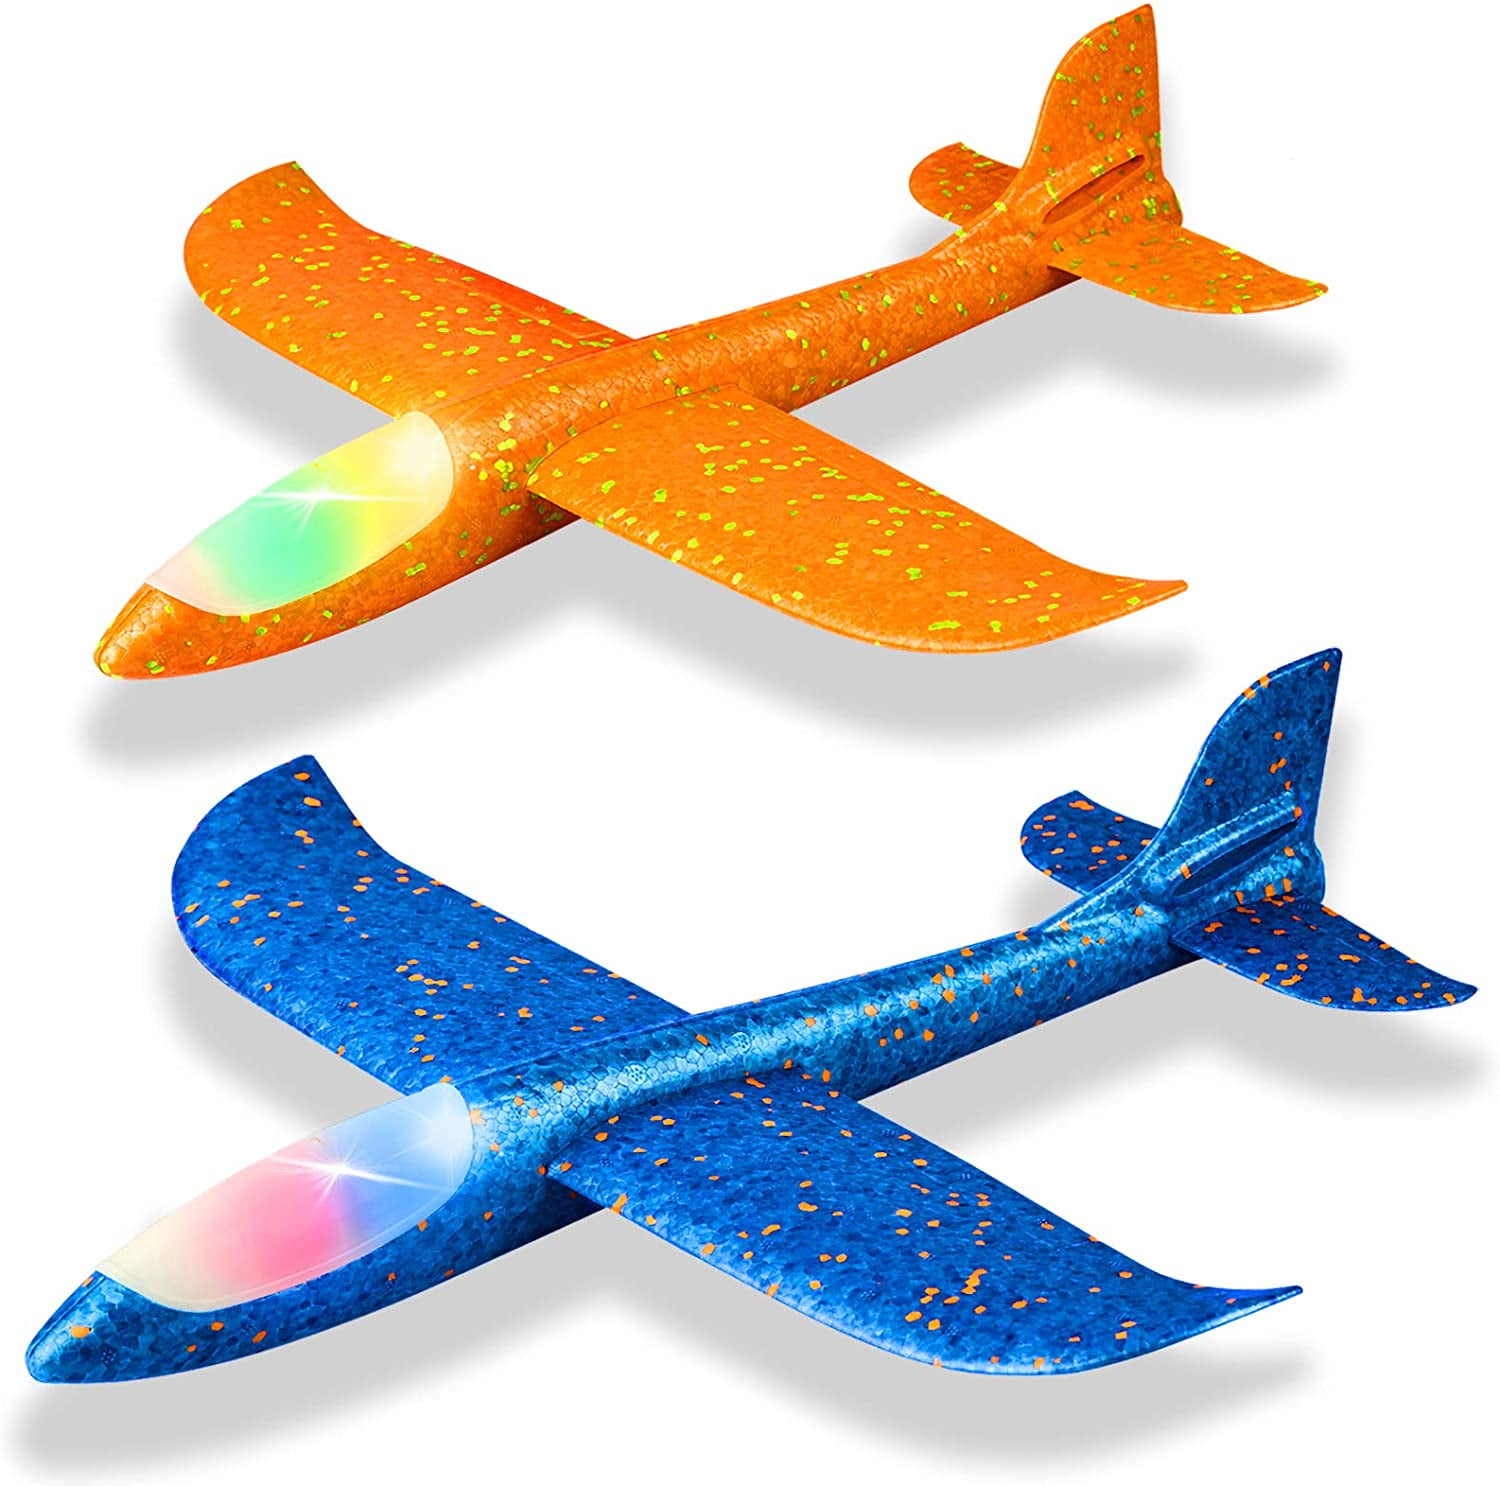 4 Pcs Hand Throwing Foam Aircraft,Airplane Toys,challenging,Outdoor Sports Toy,Model Foam Airplane,Airplane Glider,for 3-12 Years Old Kids Birthday Gifts Outdoor Flying Plane Glider Toys for Kids